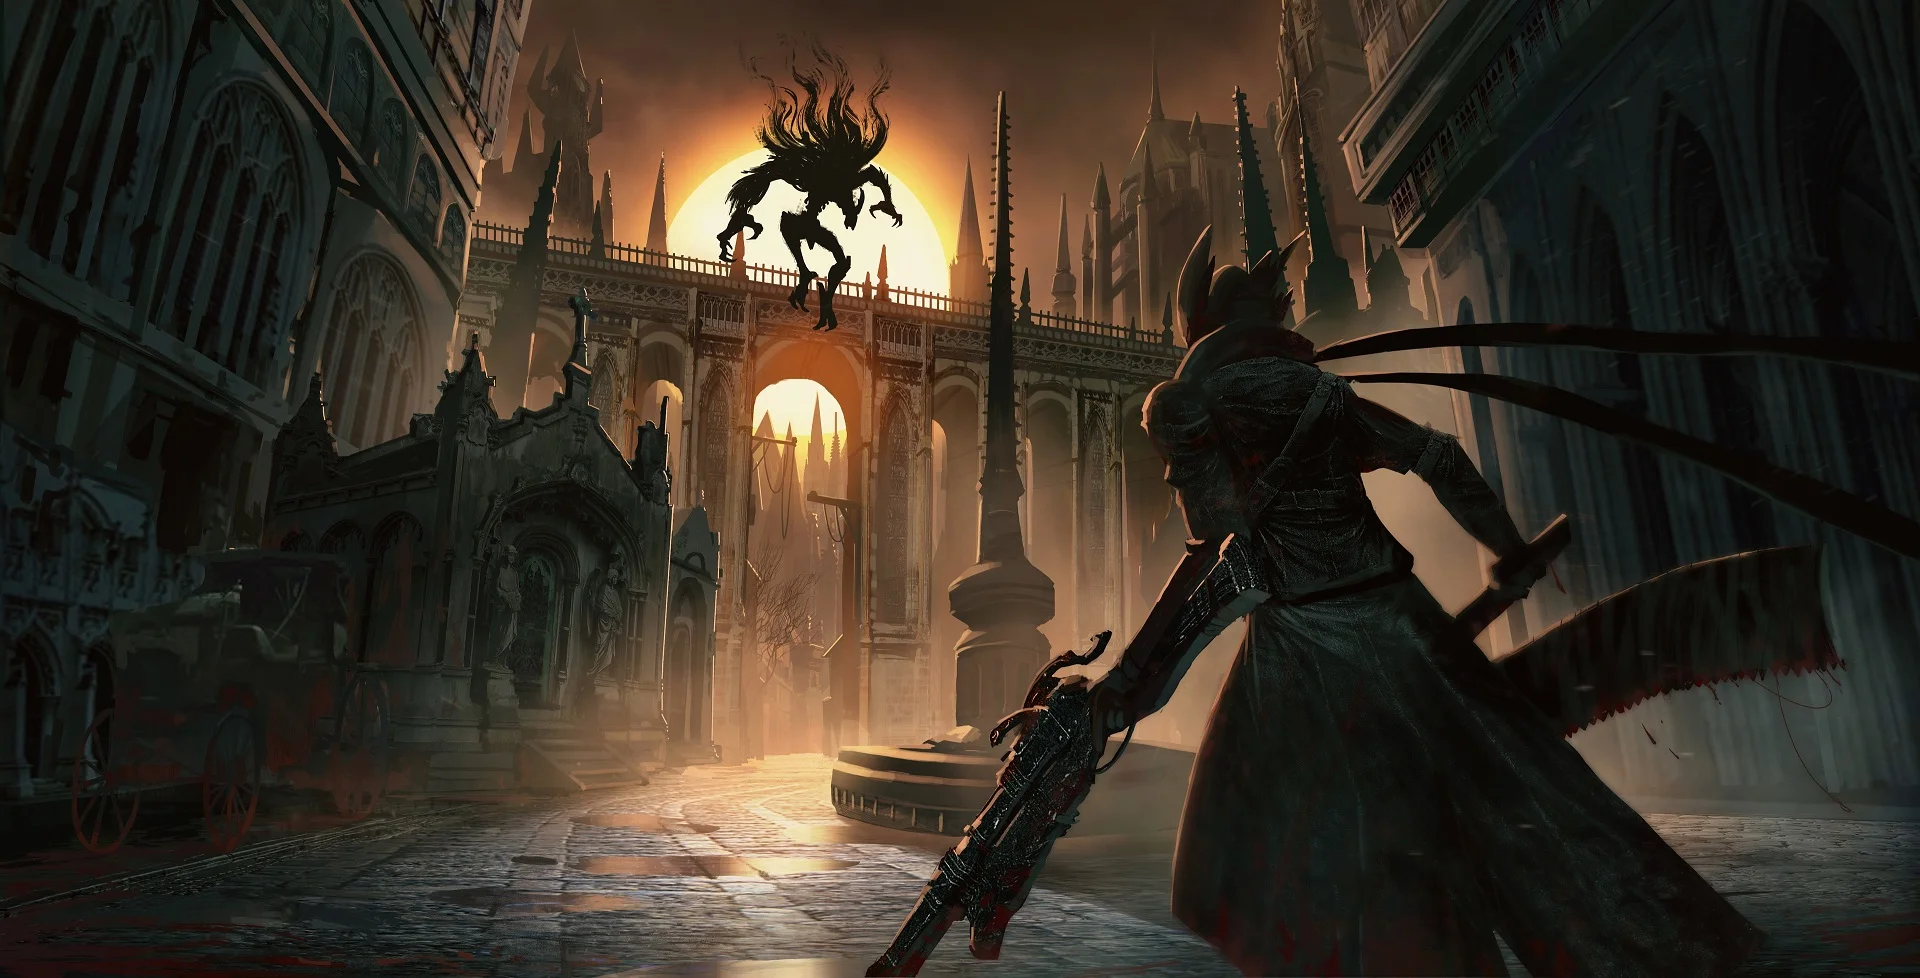 Leaker Reveals Bloodborne's PC Development Started Years Ago: What Happened?